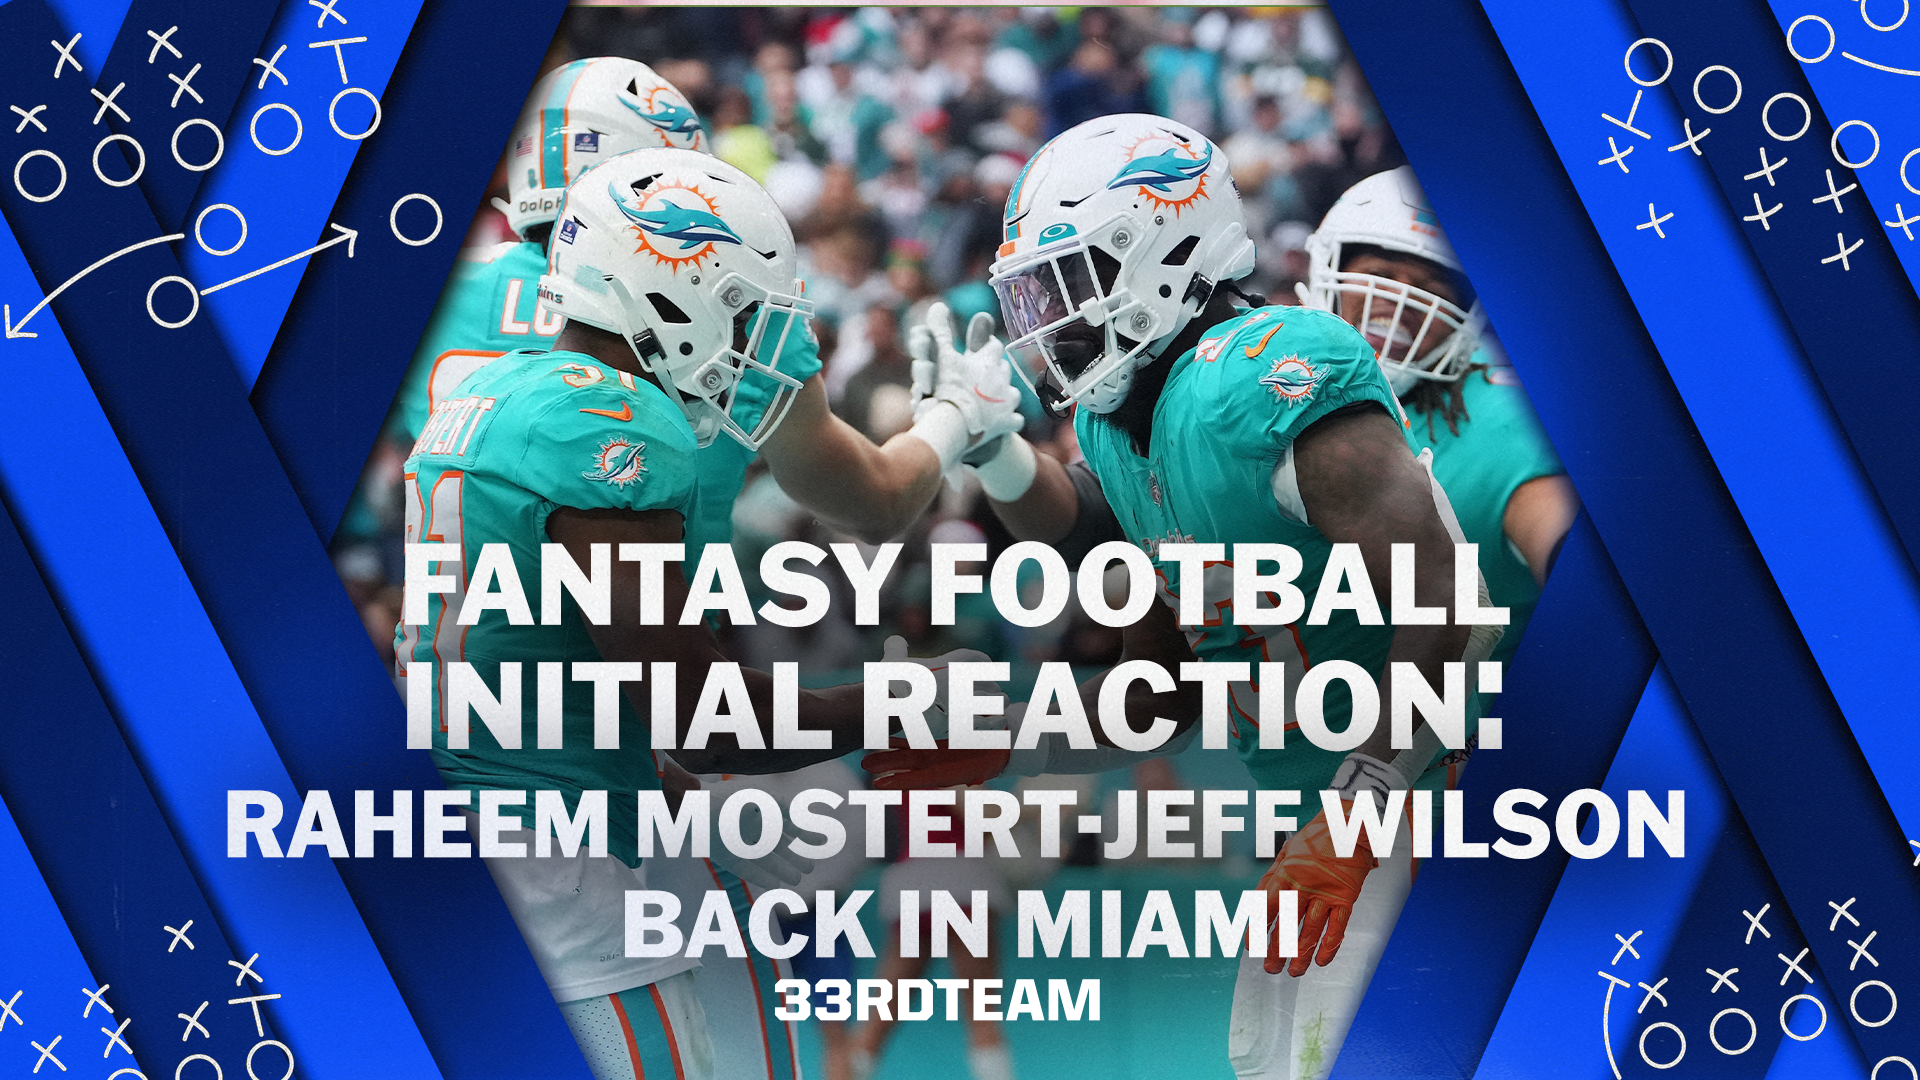 Fantasy Football Reaction: Dolphins Re-Sign RBs Wilson, Mostert